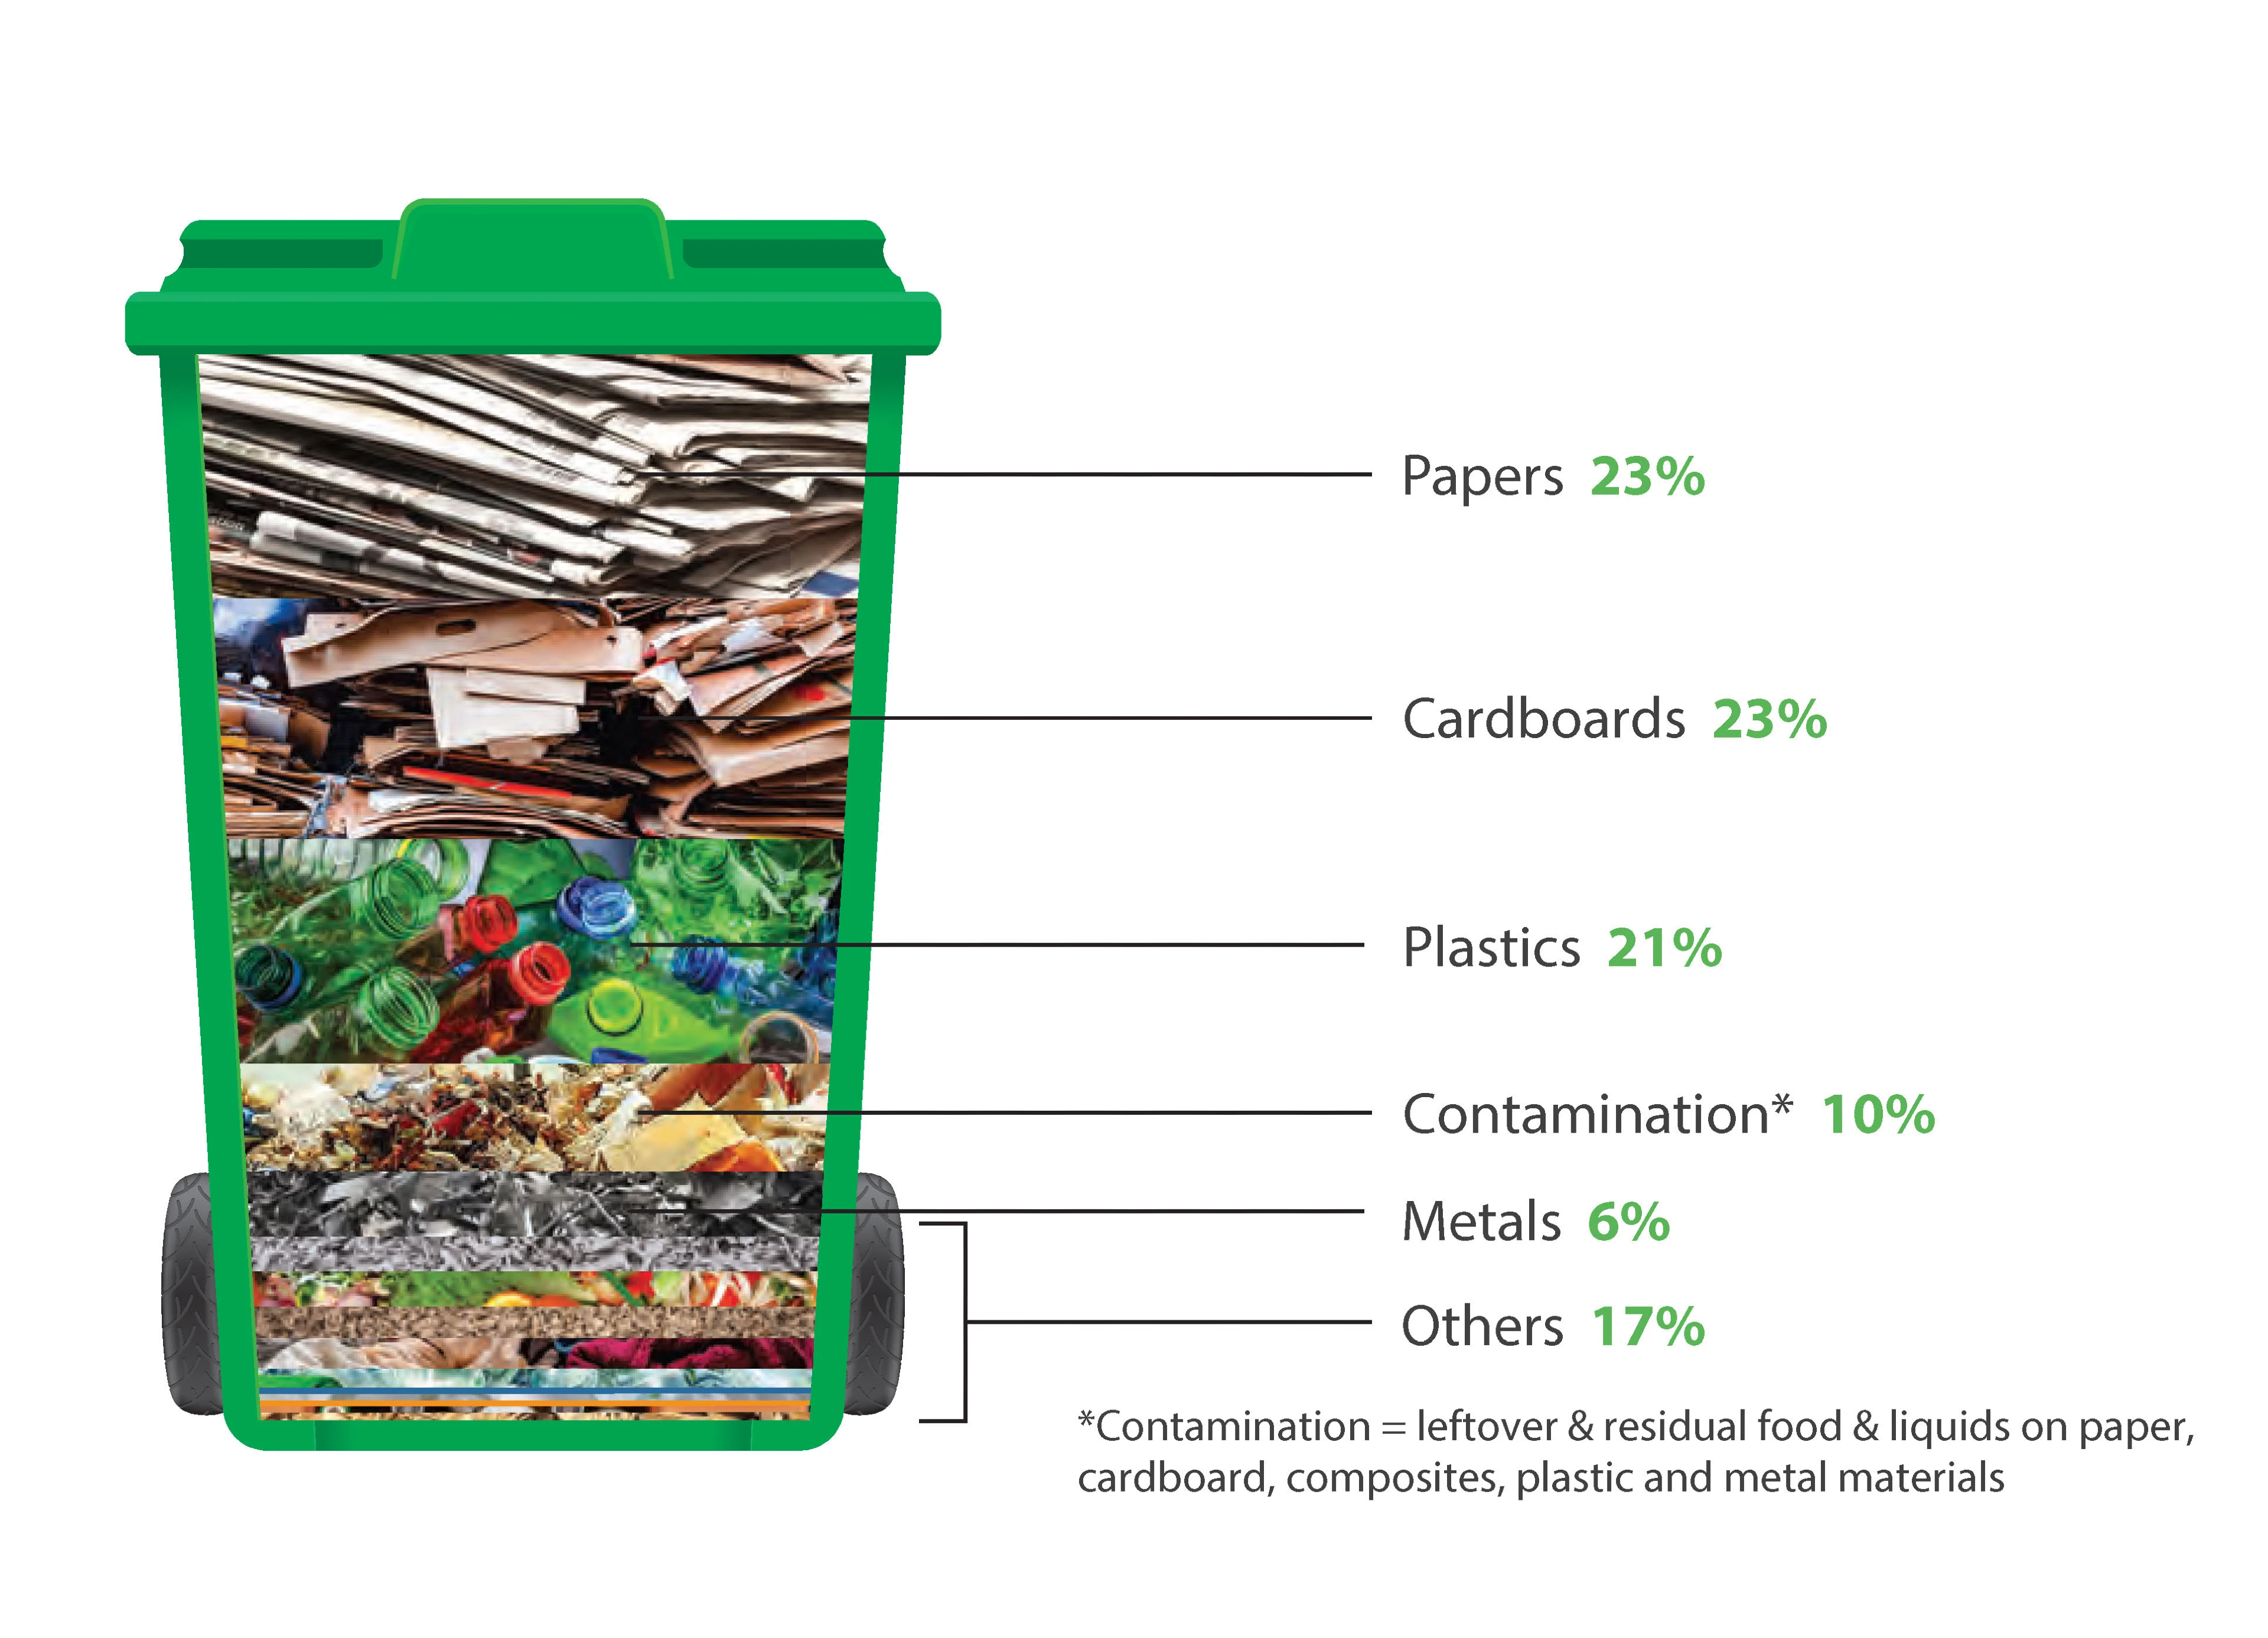 shows the breakdown of waste in a household recycling bin